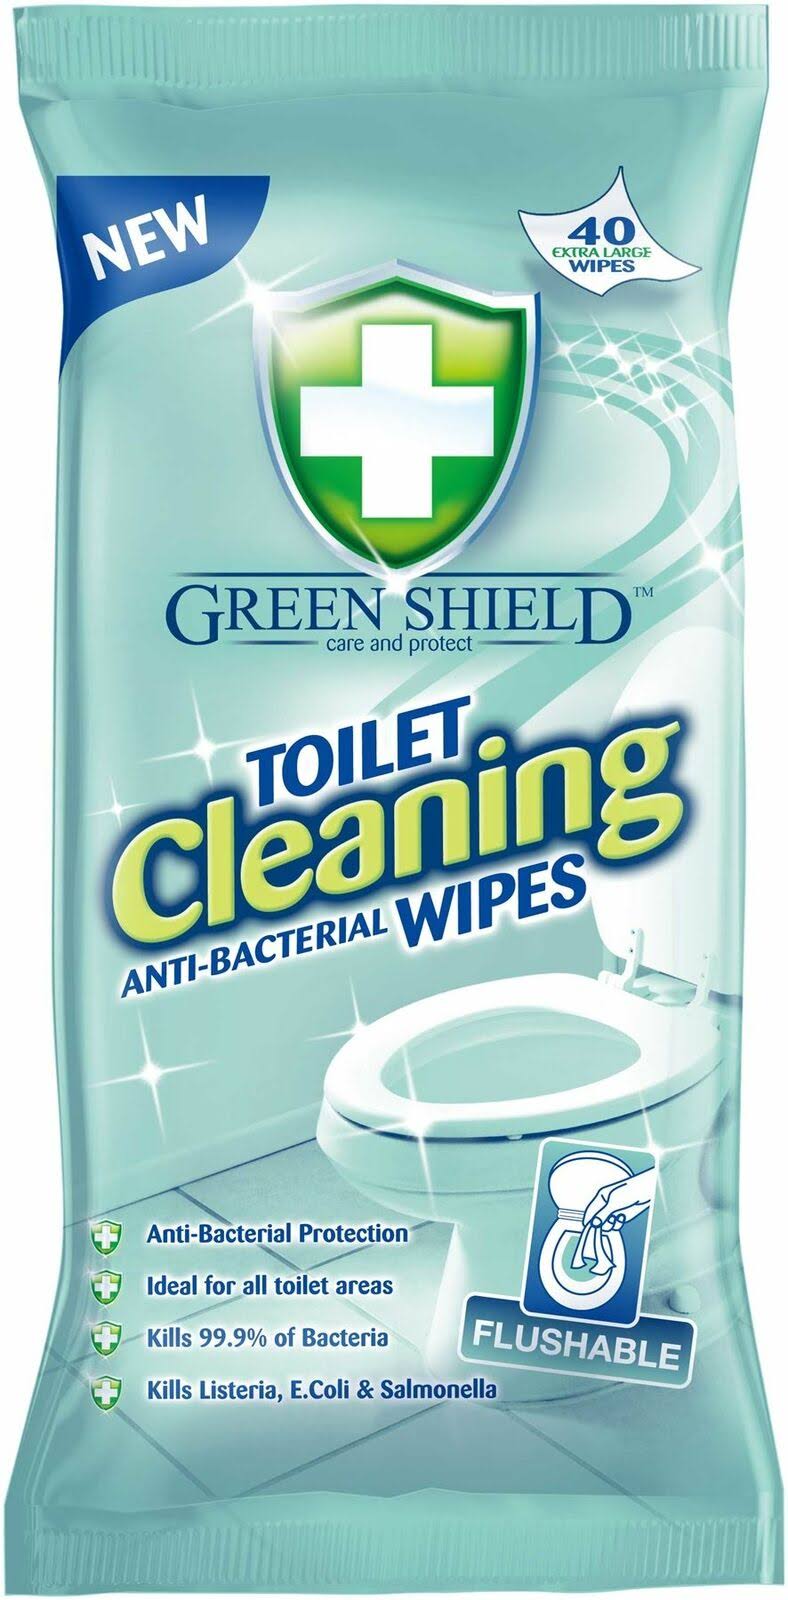 Green Shield Toilet Cleaning Anti- Bacterial Wipes Big Value Pack of 120